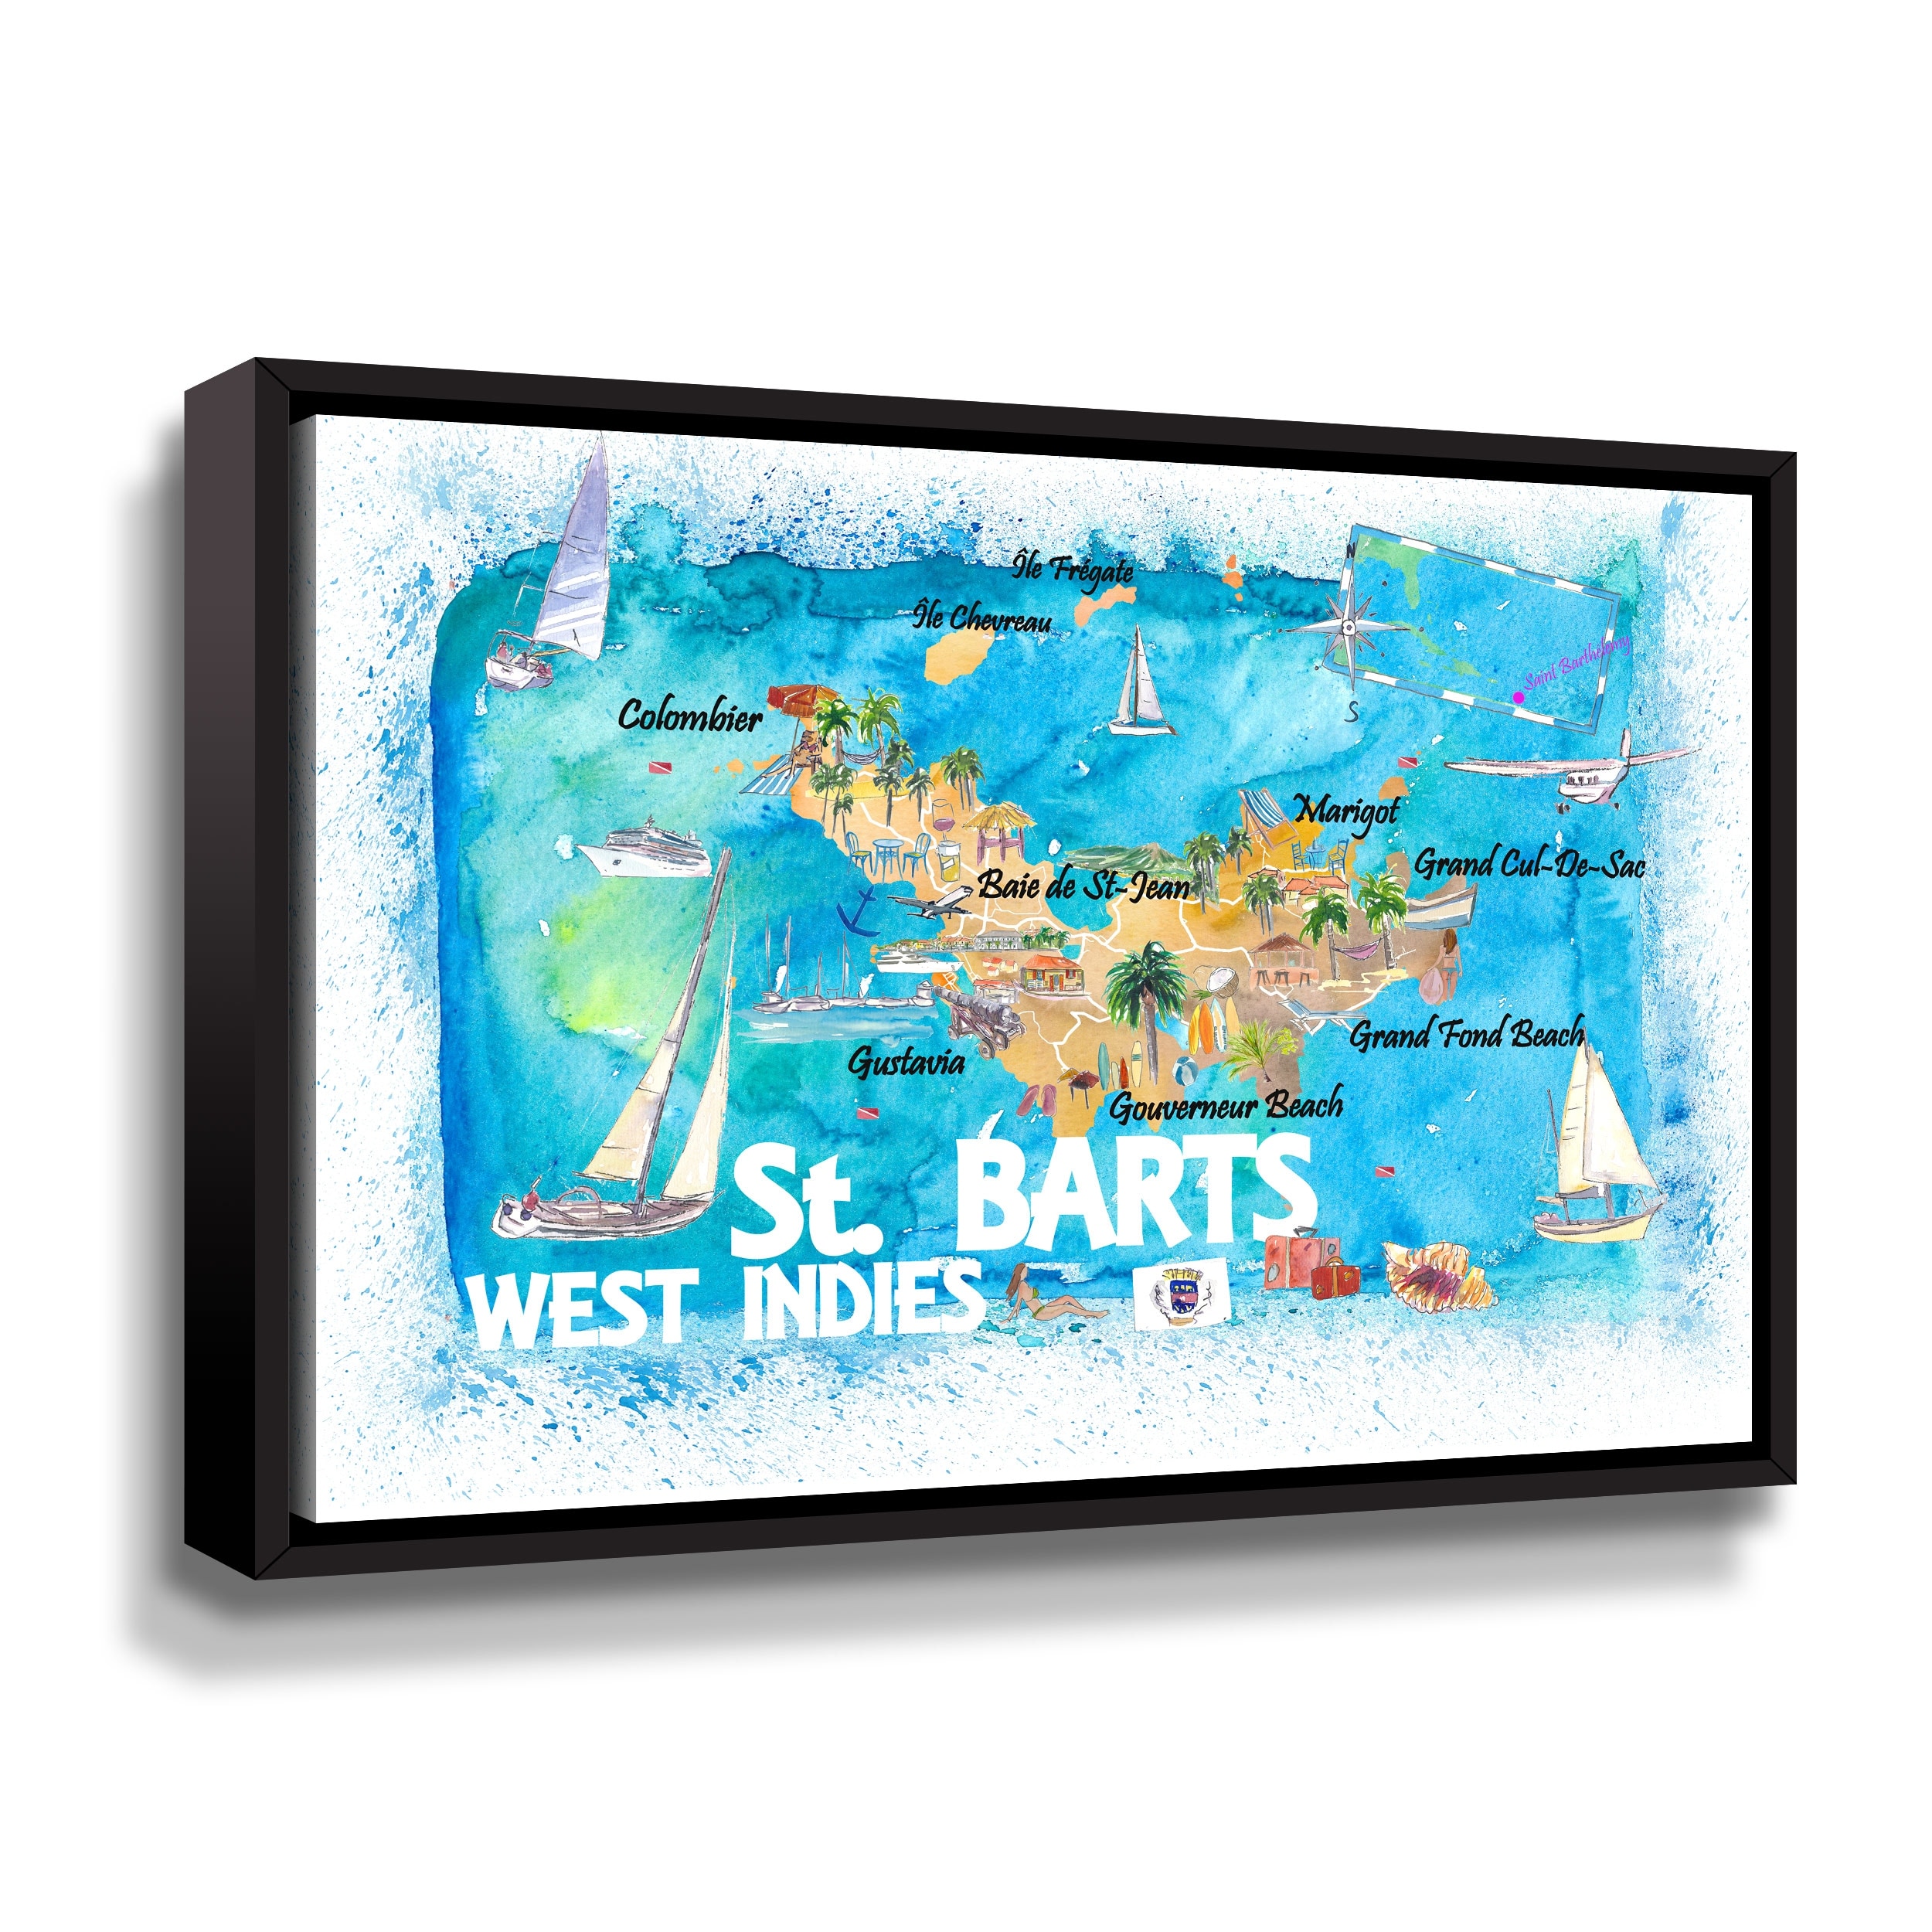 St. Barts Map & Where is St Barts?